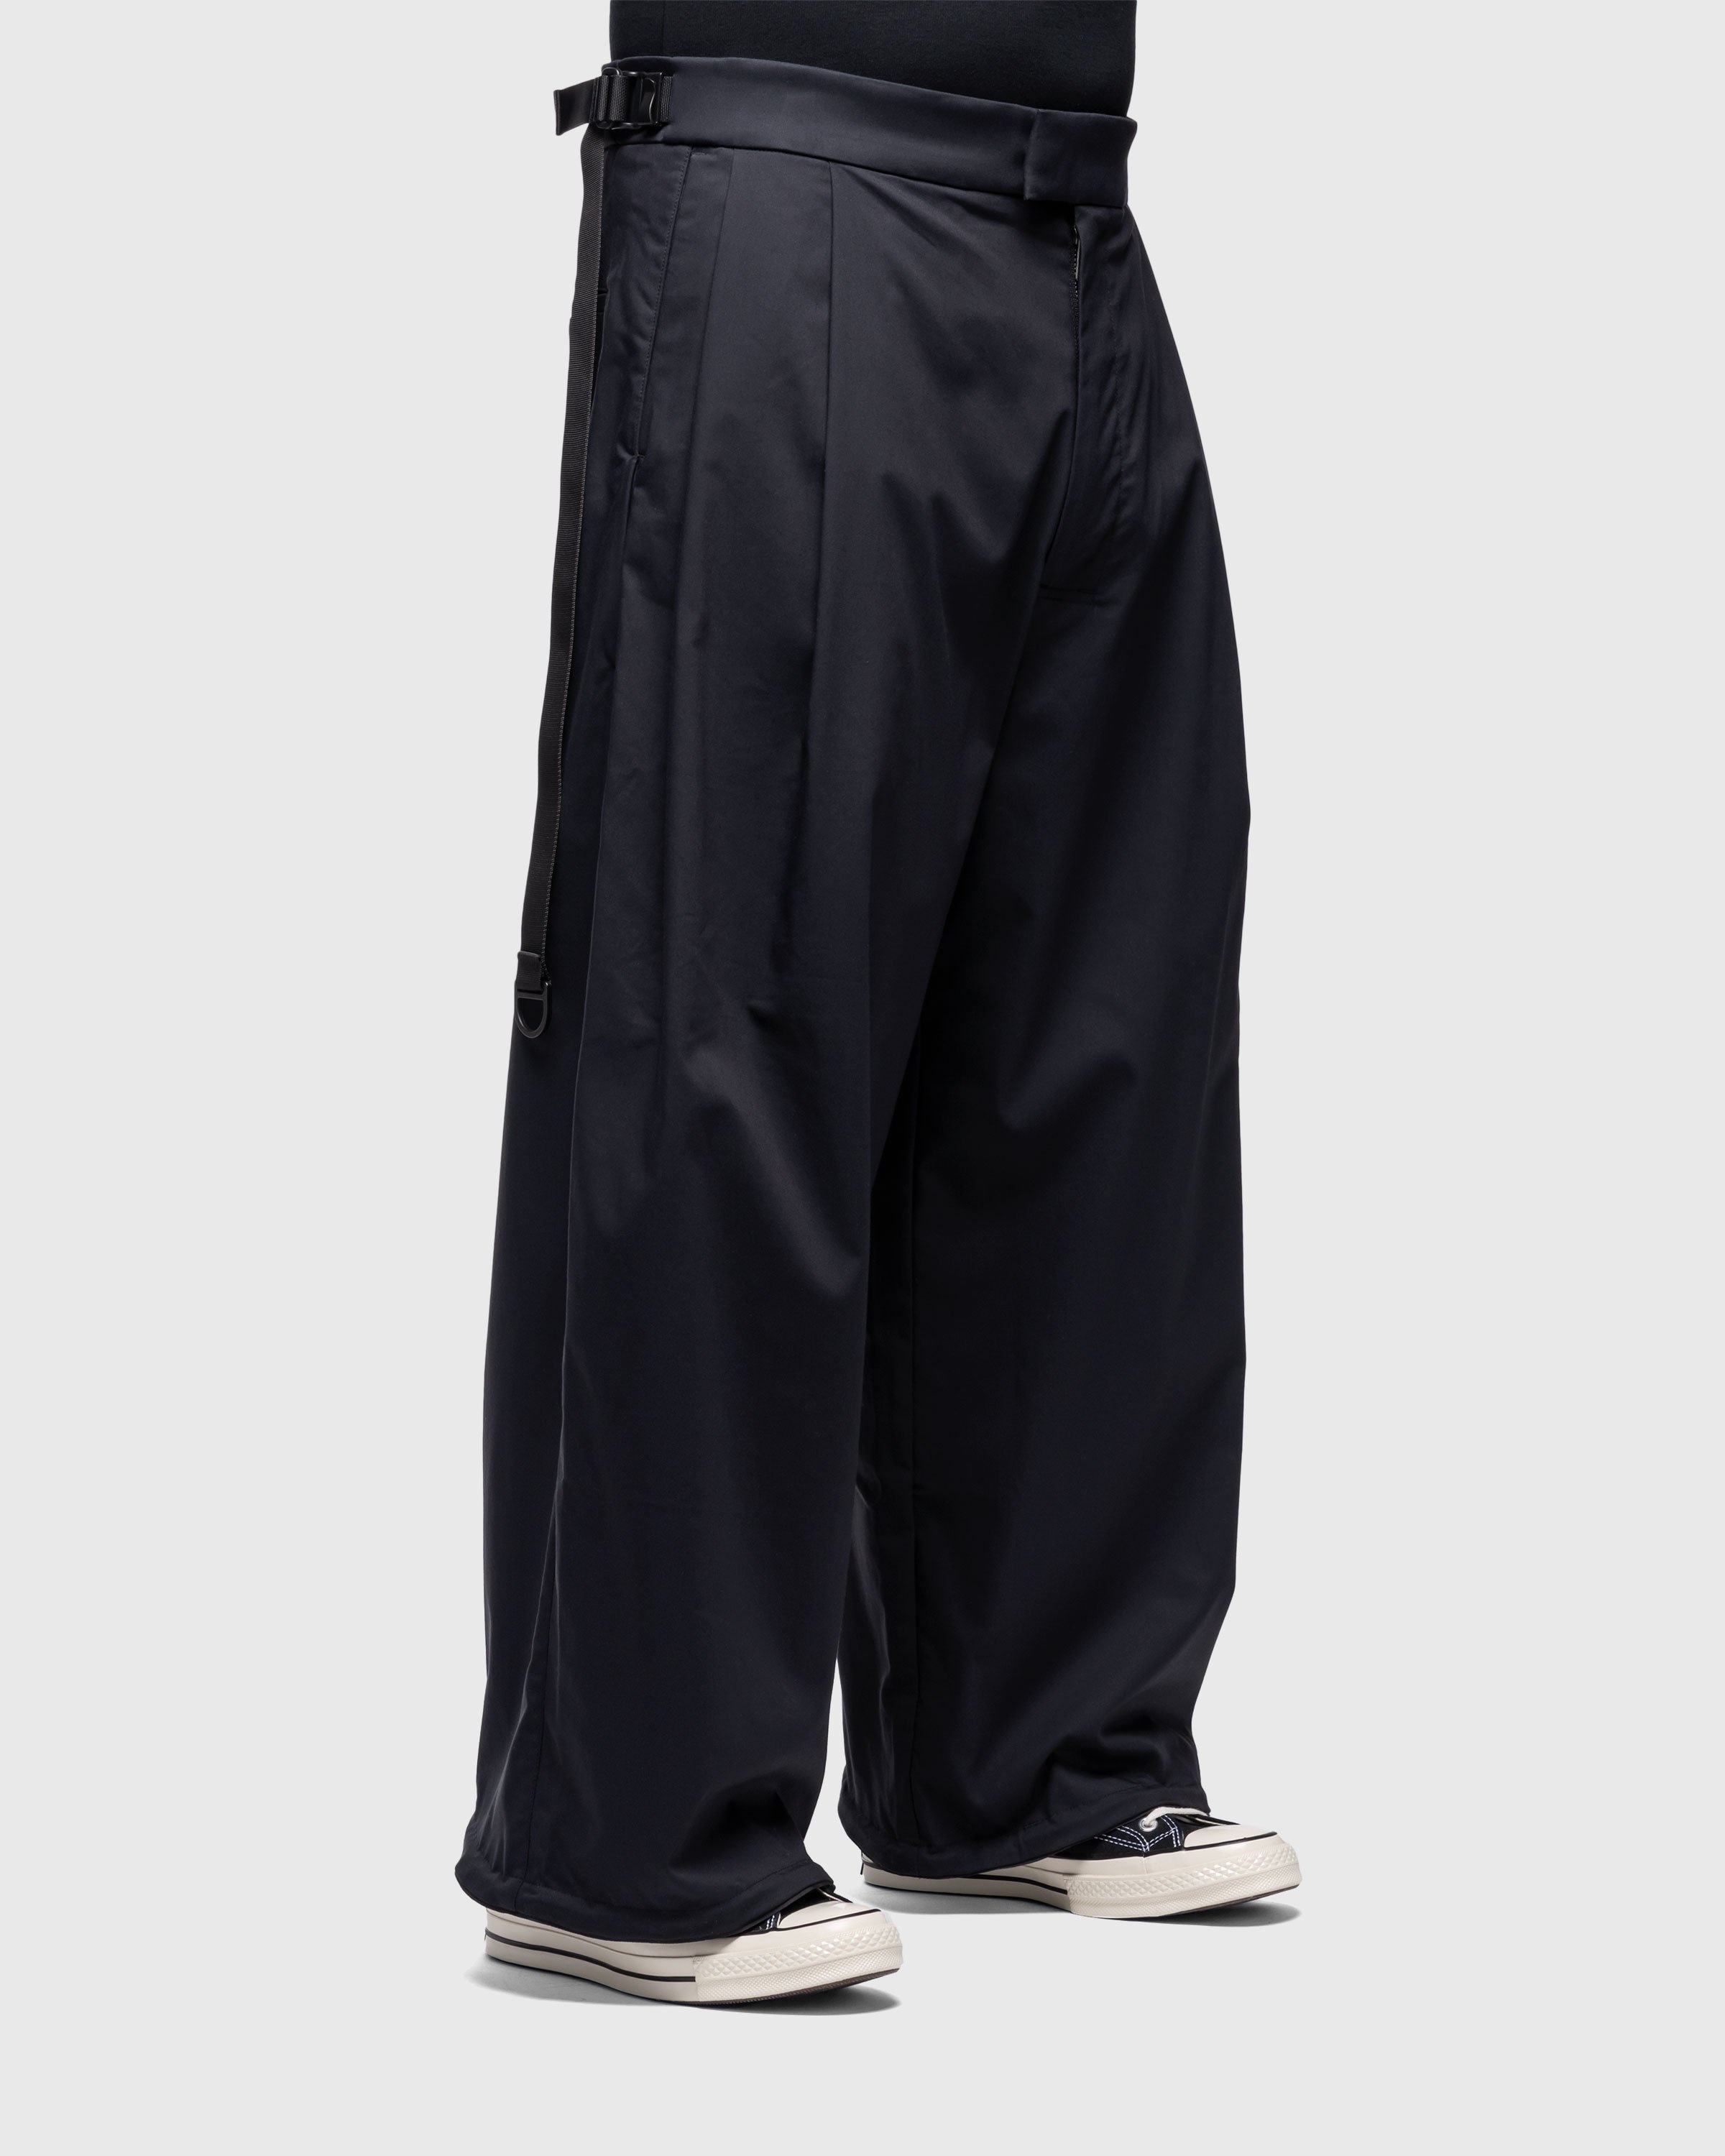 ACRONYM – P48-CH Micro Twill Pleated Trouser Black - Trousers - Black - Image 4